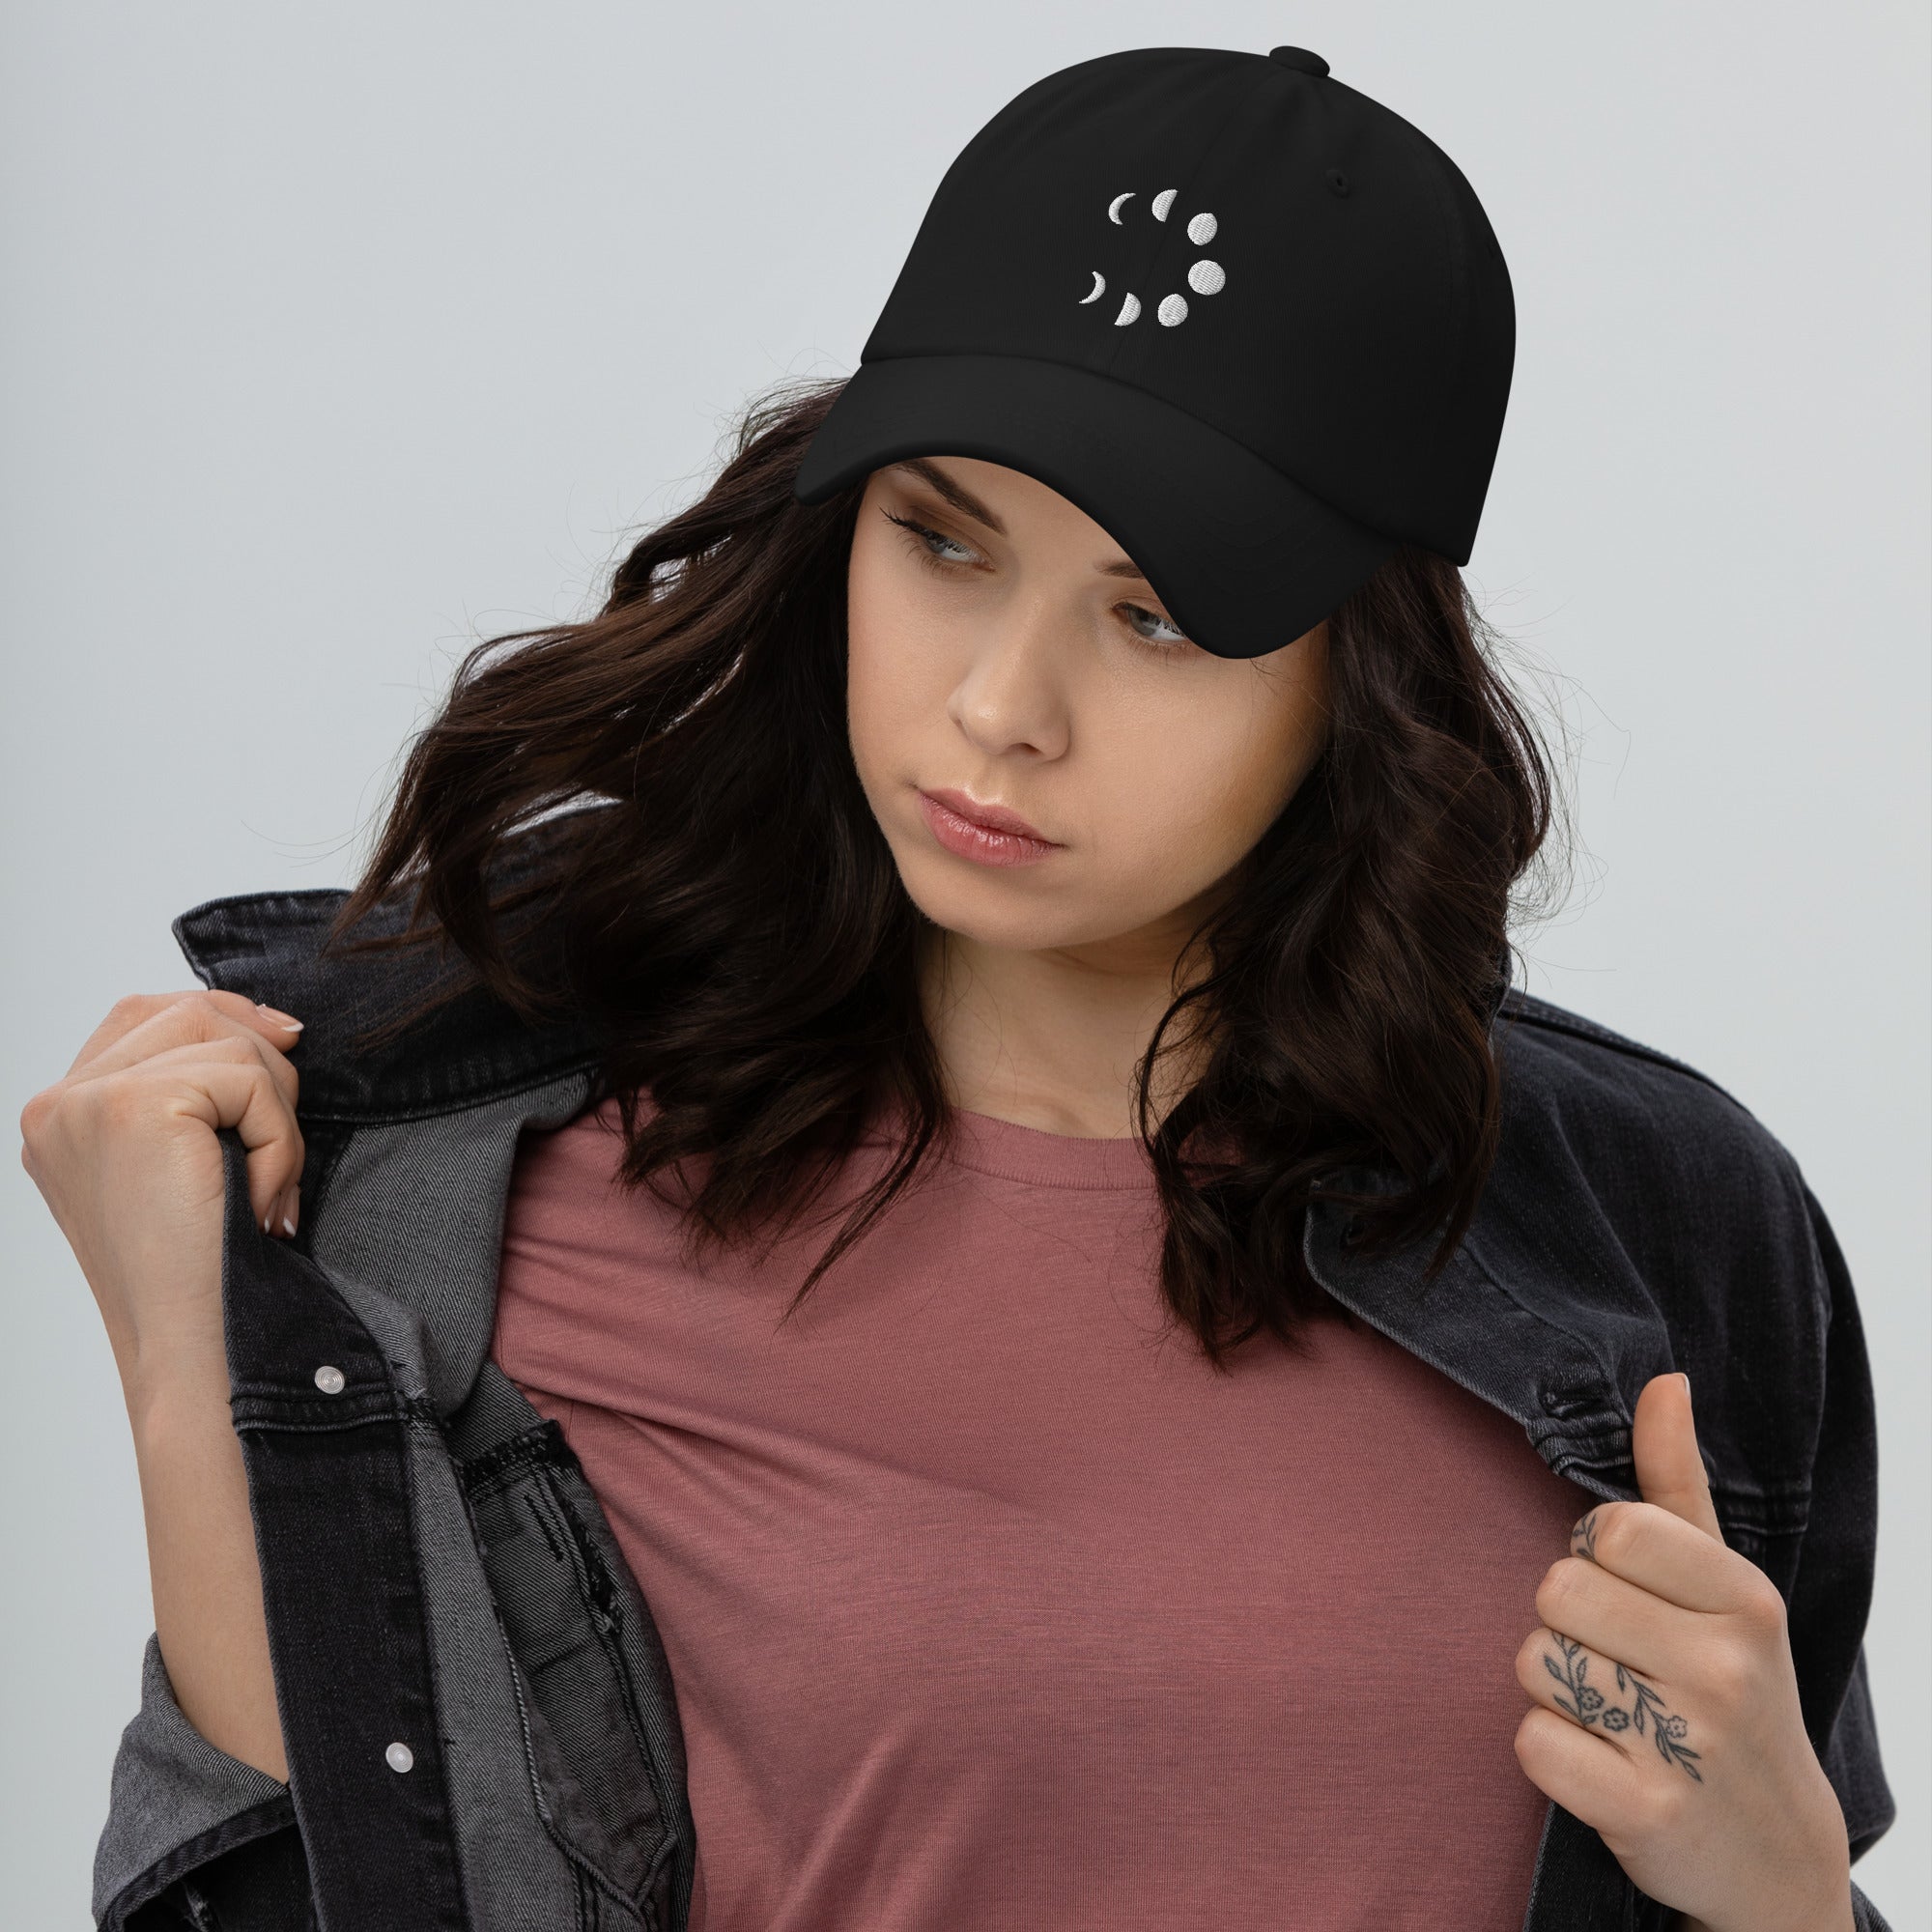 Lunar Moon Phases Embroidered Baseball Cap Dad hat - Edge of Life Designs